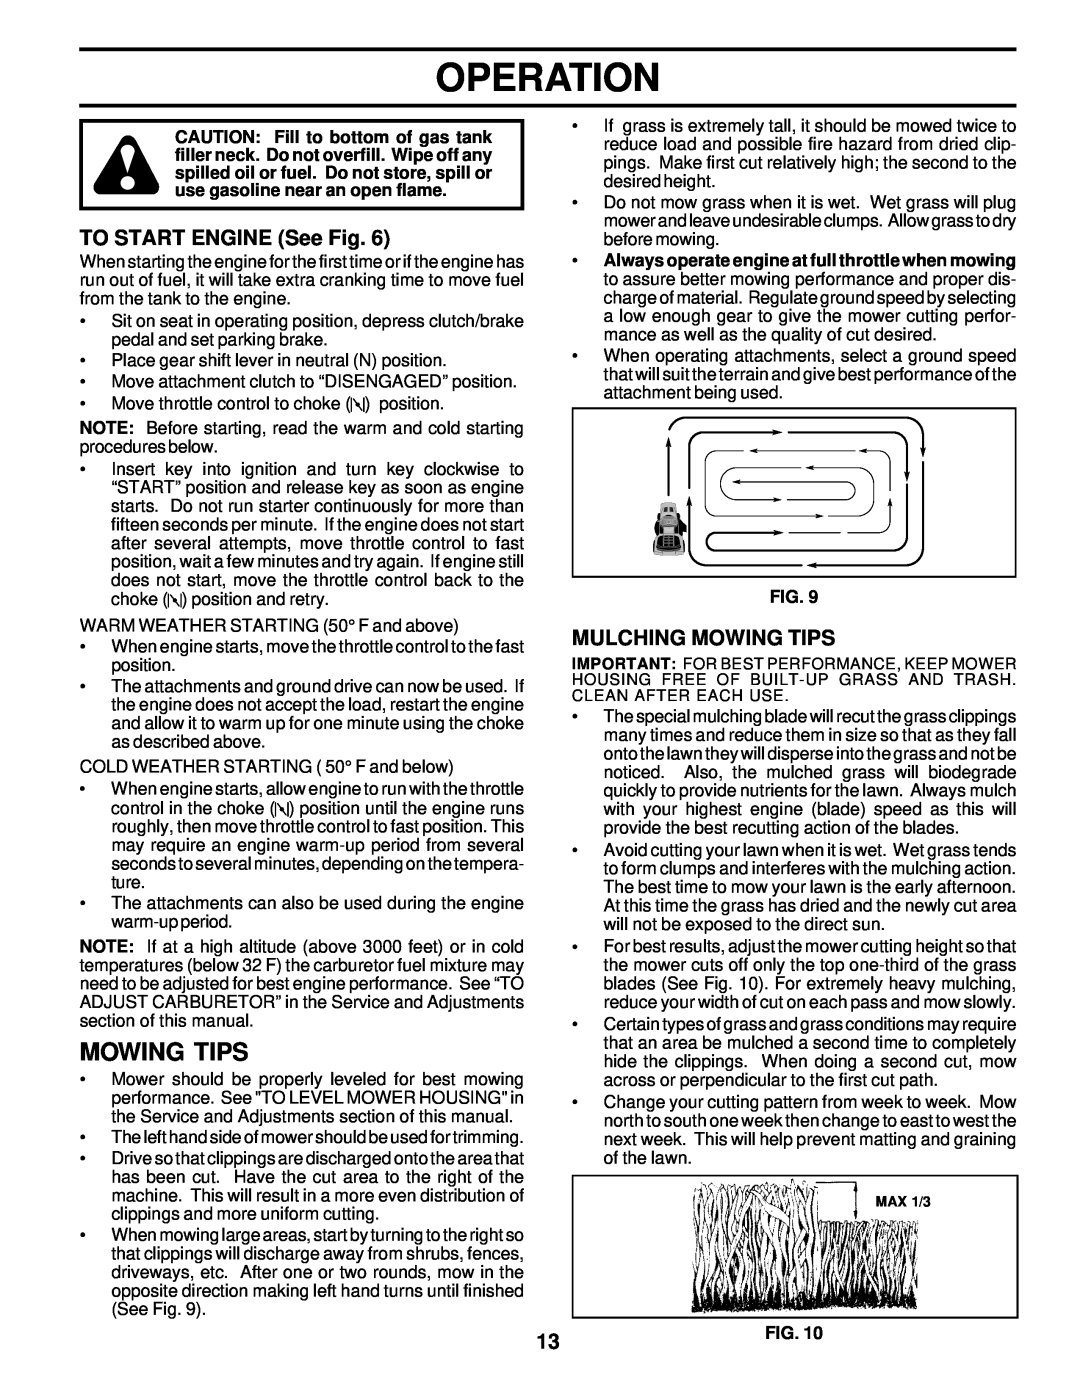 Poulan 177545 owner manual TO START ENGINE See Fig, Mulching Mowing Tips, Operation 